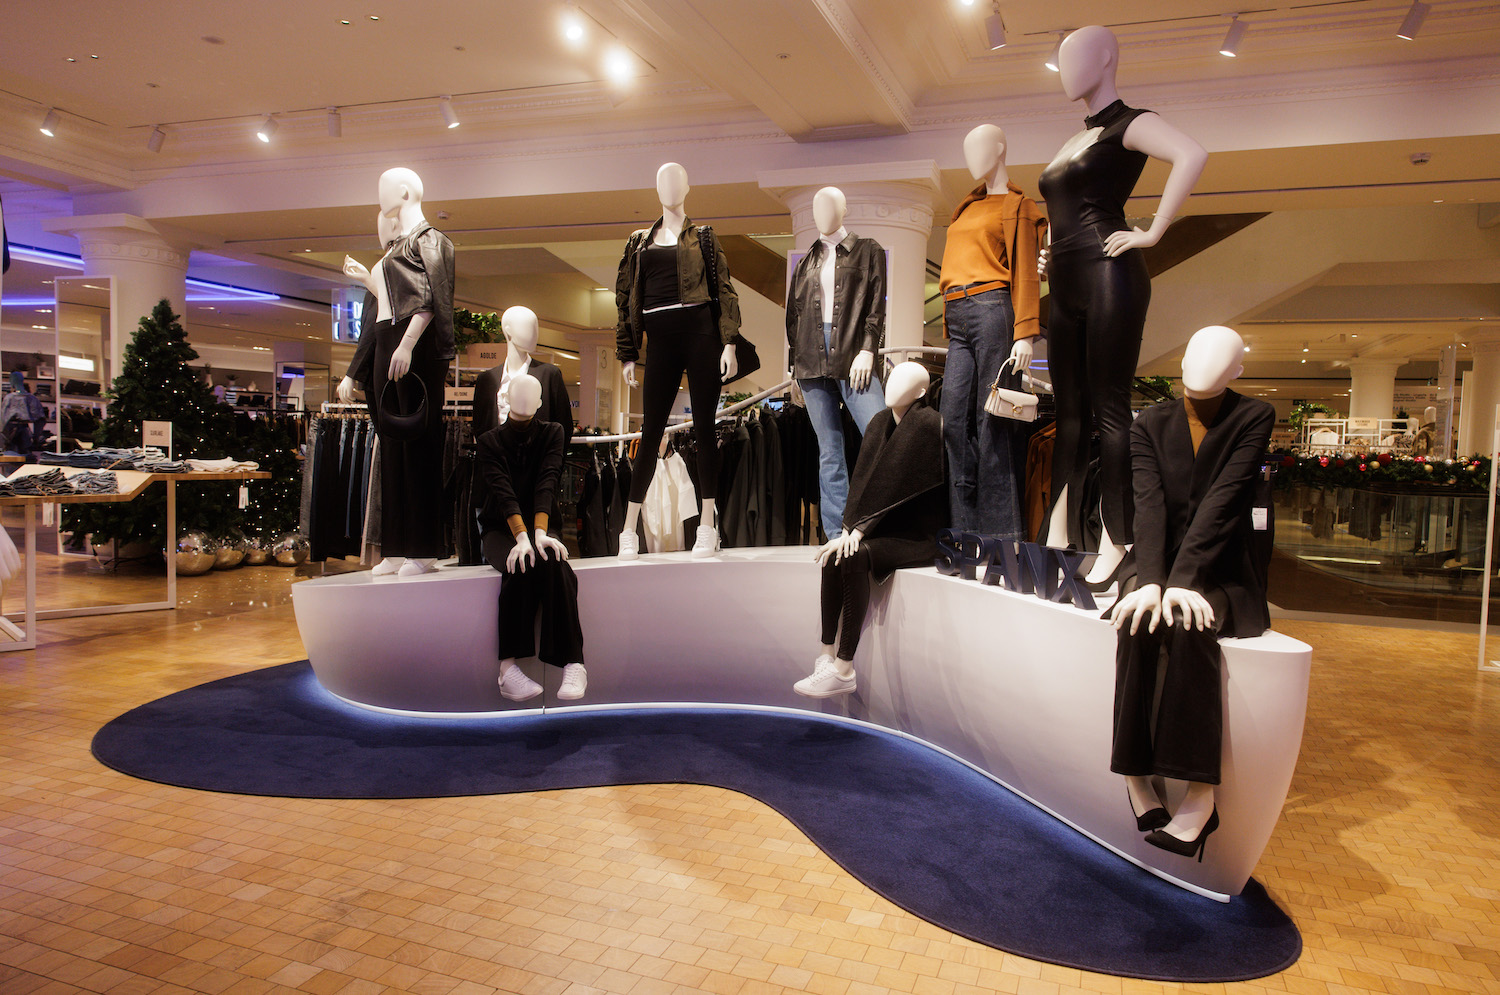 SPANX Launches First UK Apparel Pop-Up in Selfridges, London